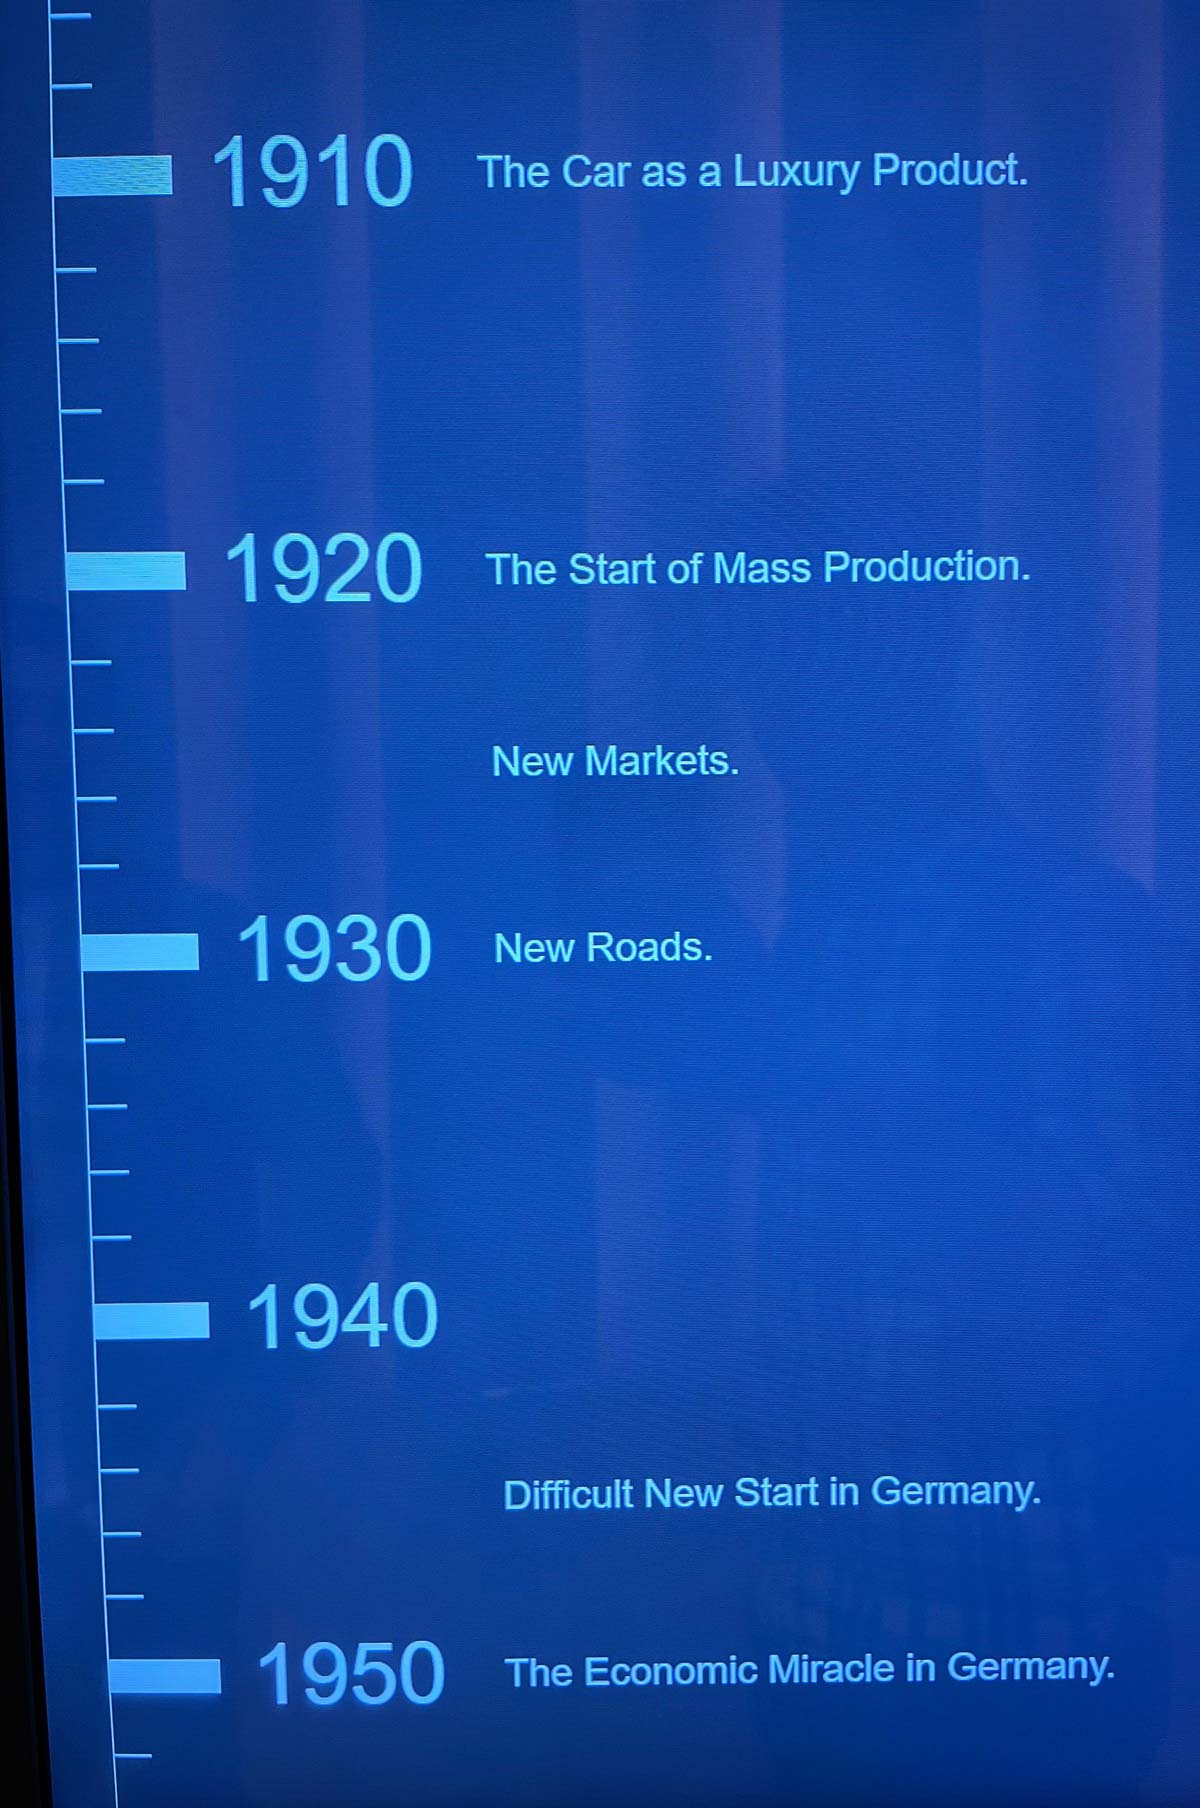 Timeline in the BMW museum in Munich